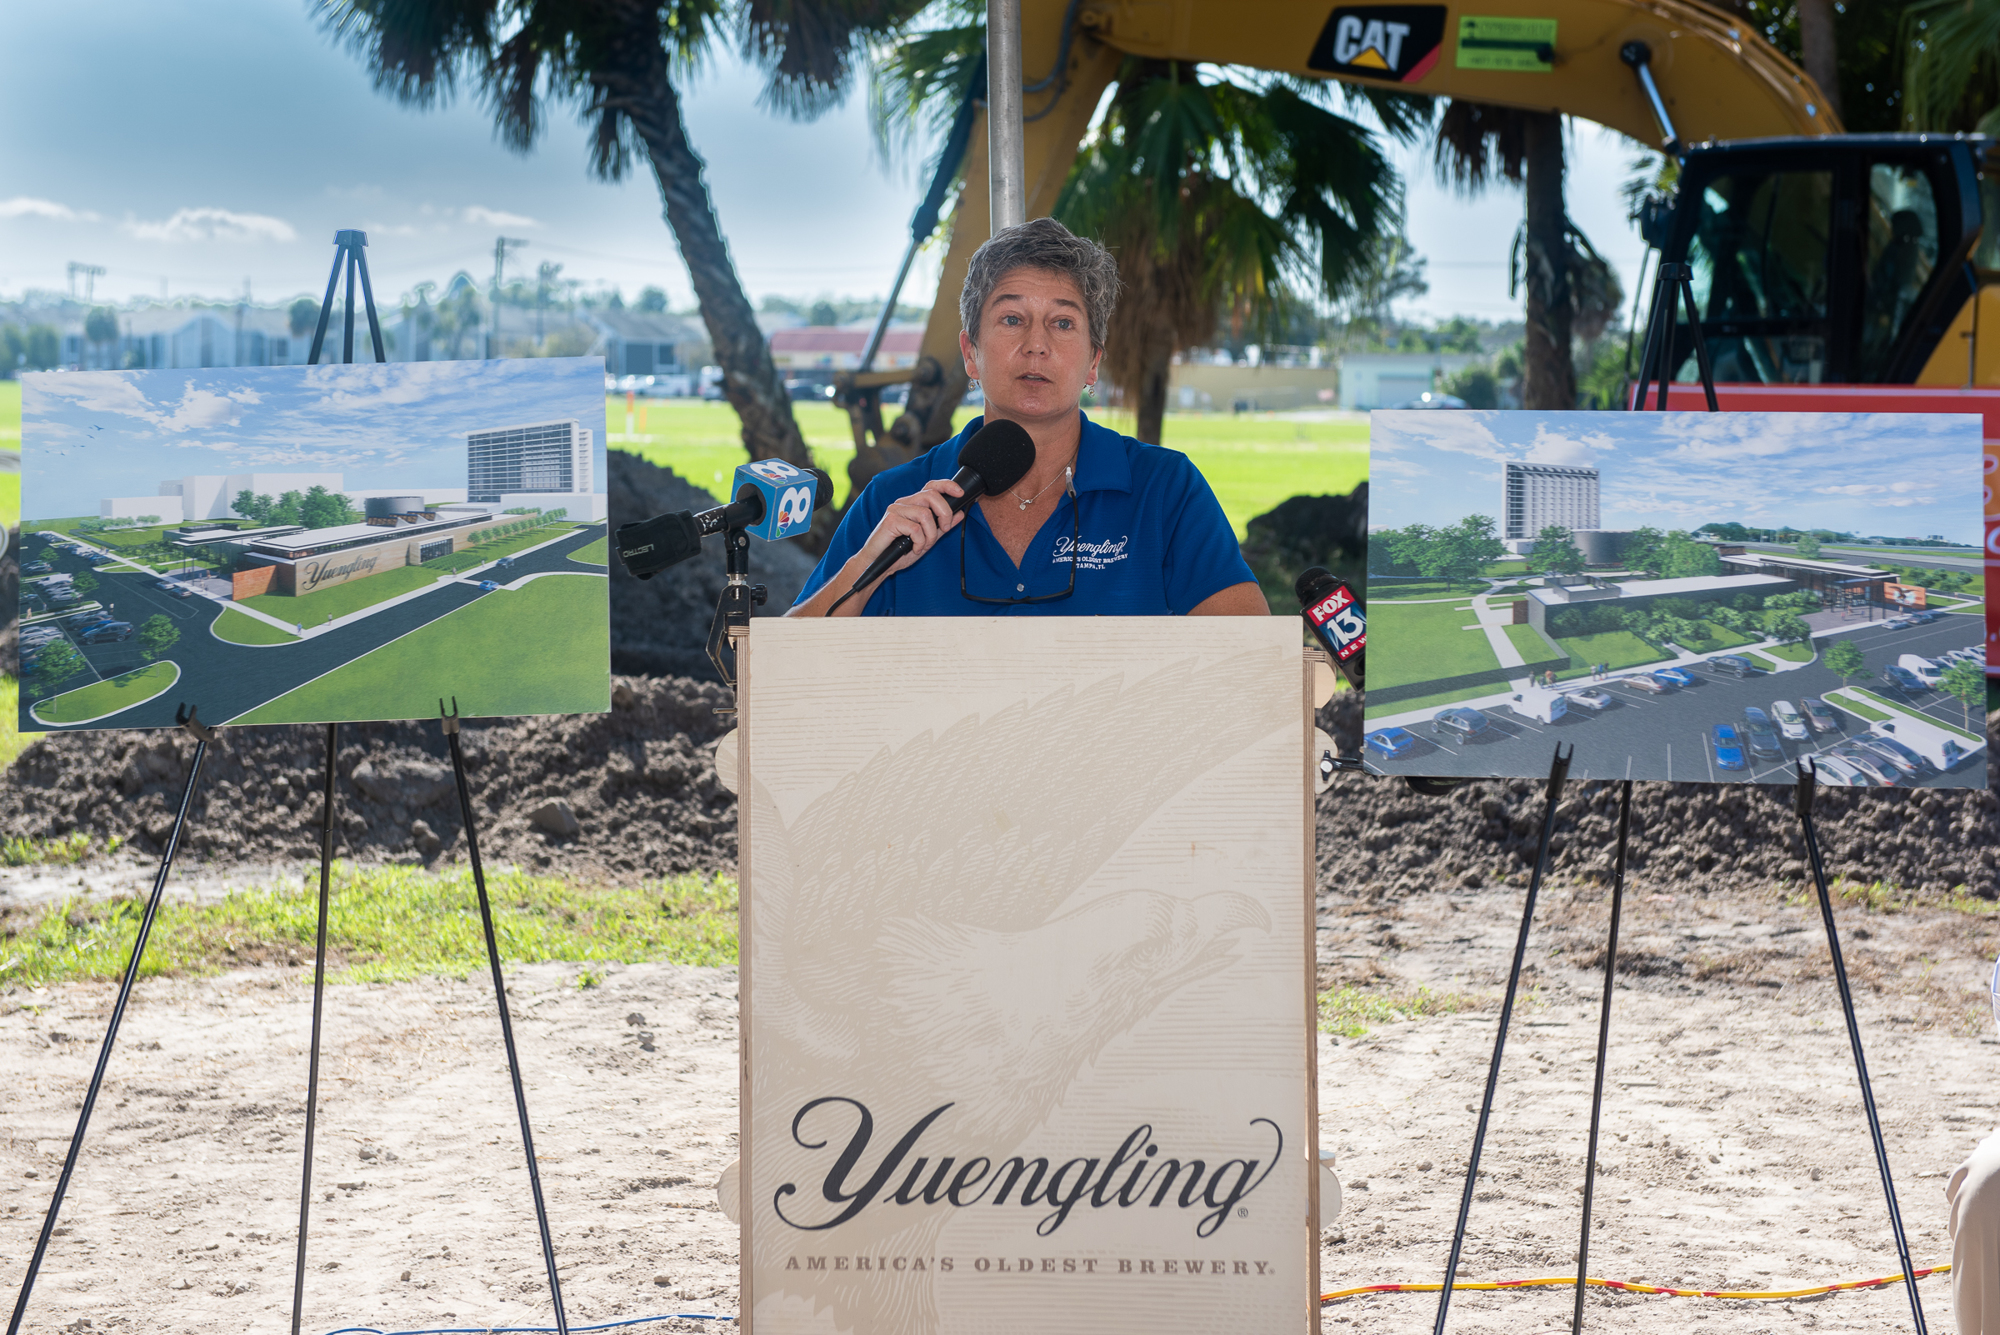 Courtesy. Jen Yuengling, a sixth-generation member of the Yuengling family, at the groundbreaking for the beer company's expanded Tampa campus.